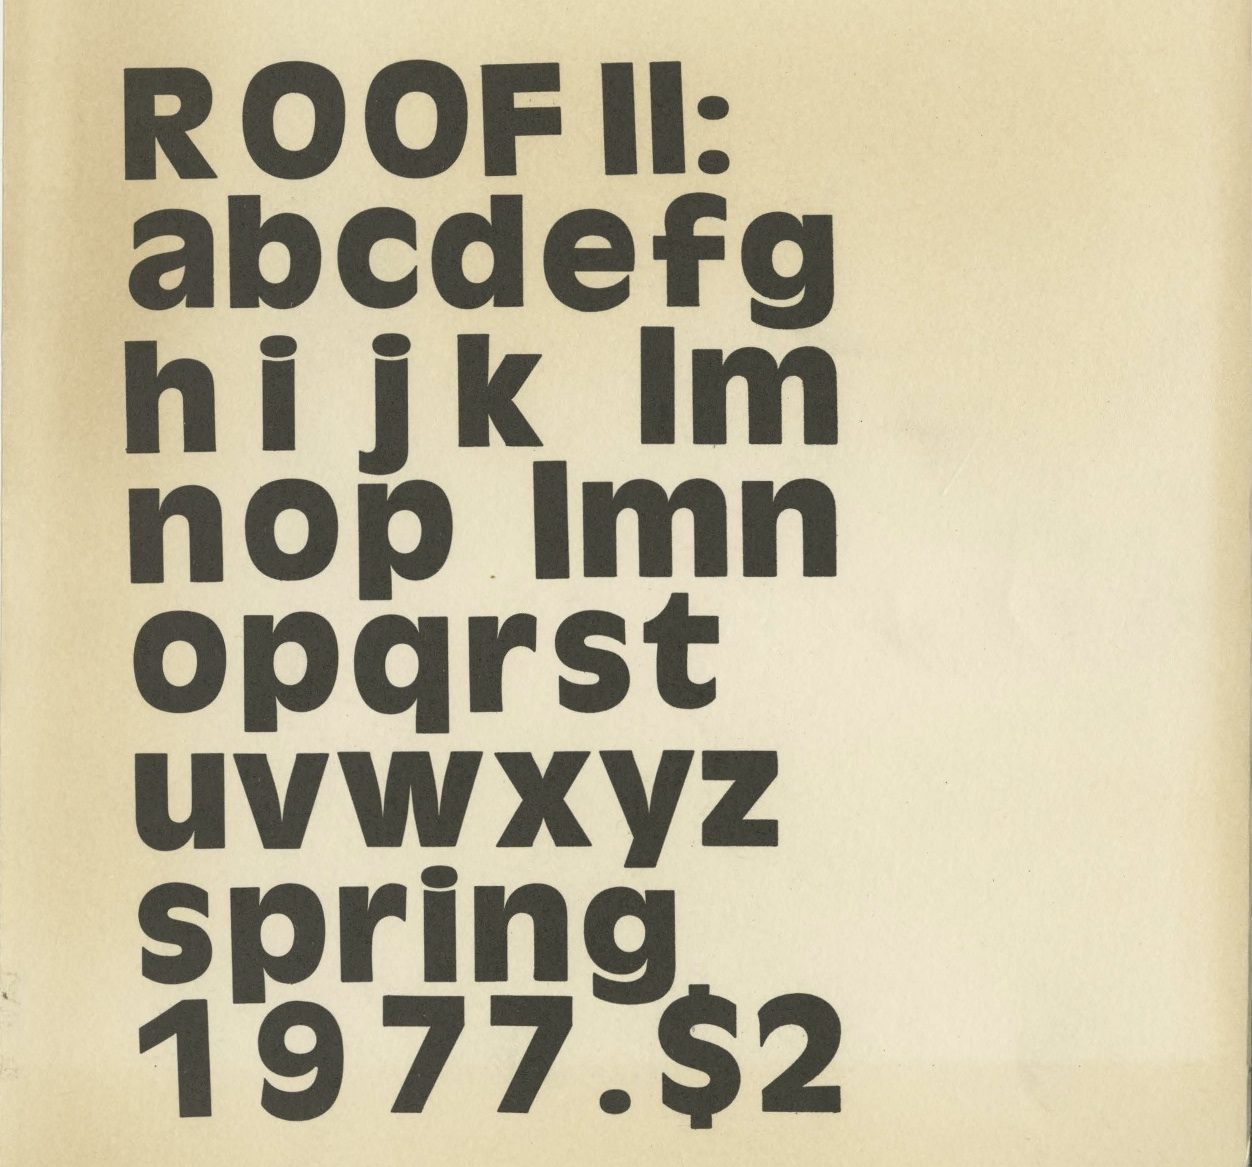 from Roof, No. II, Spring 1977